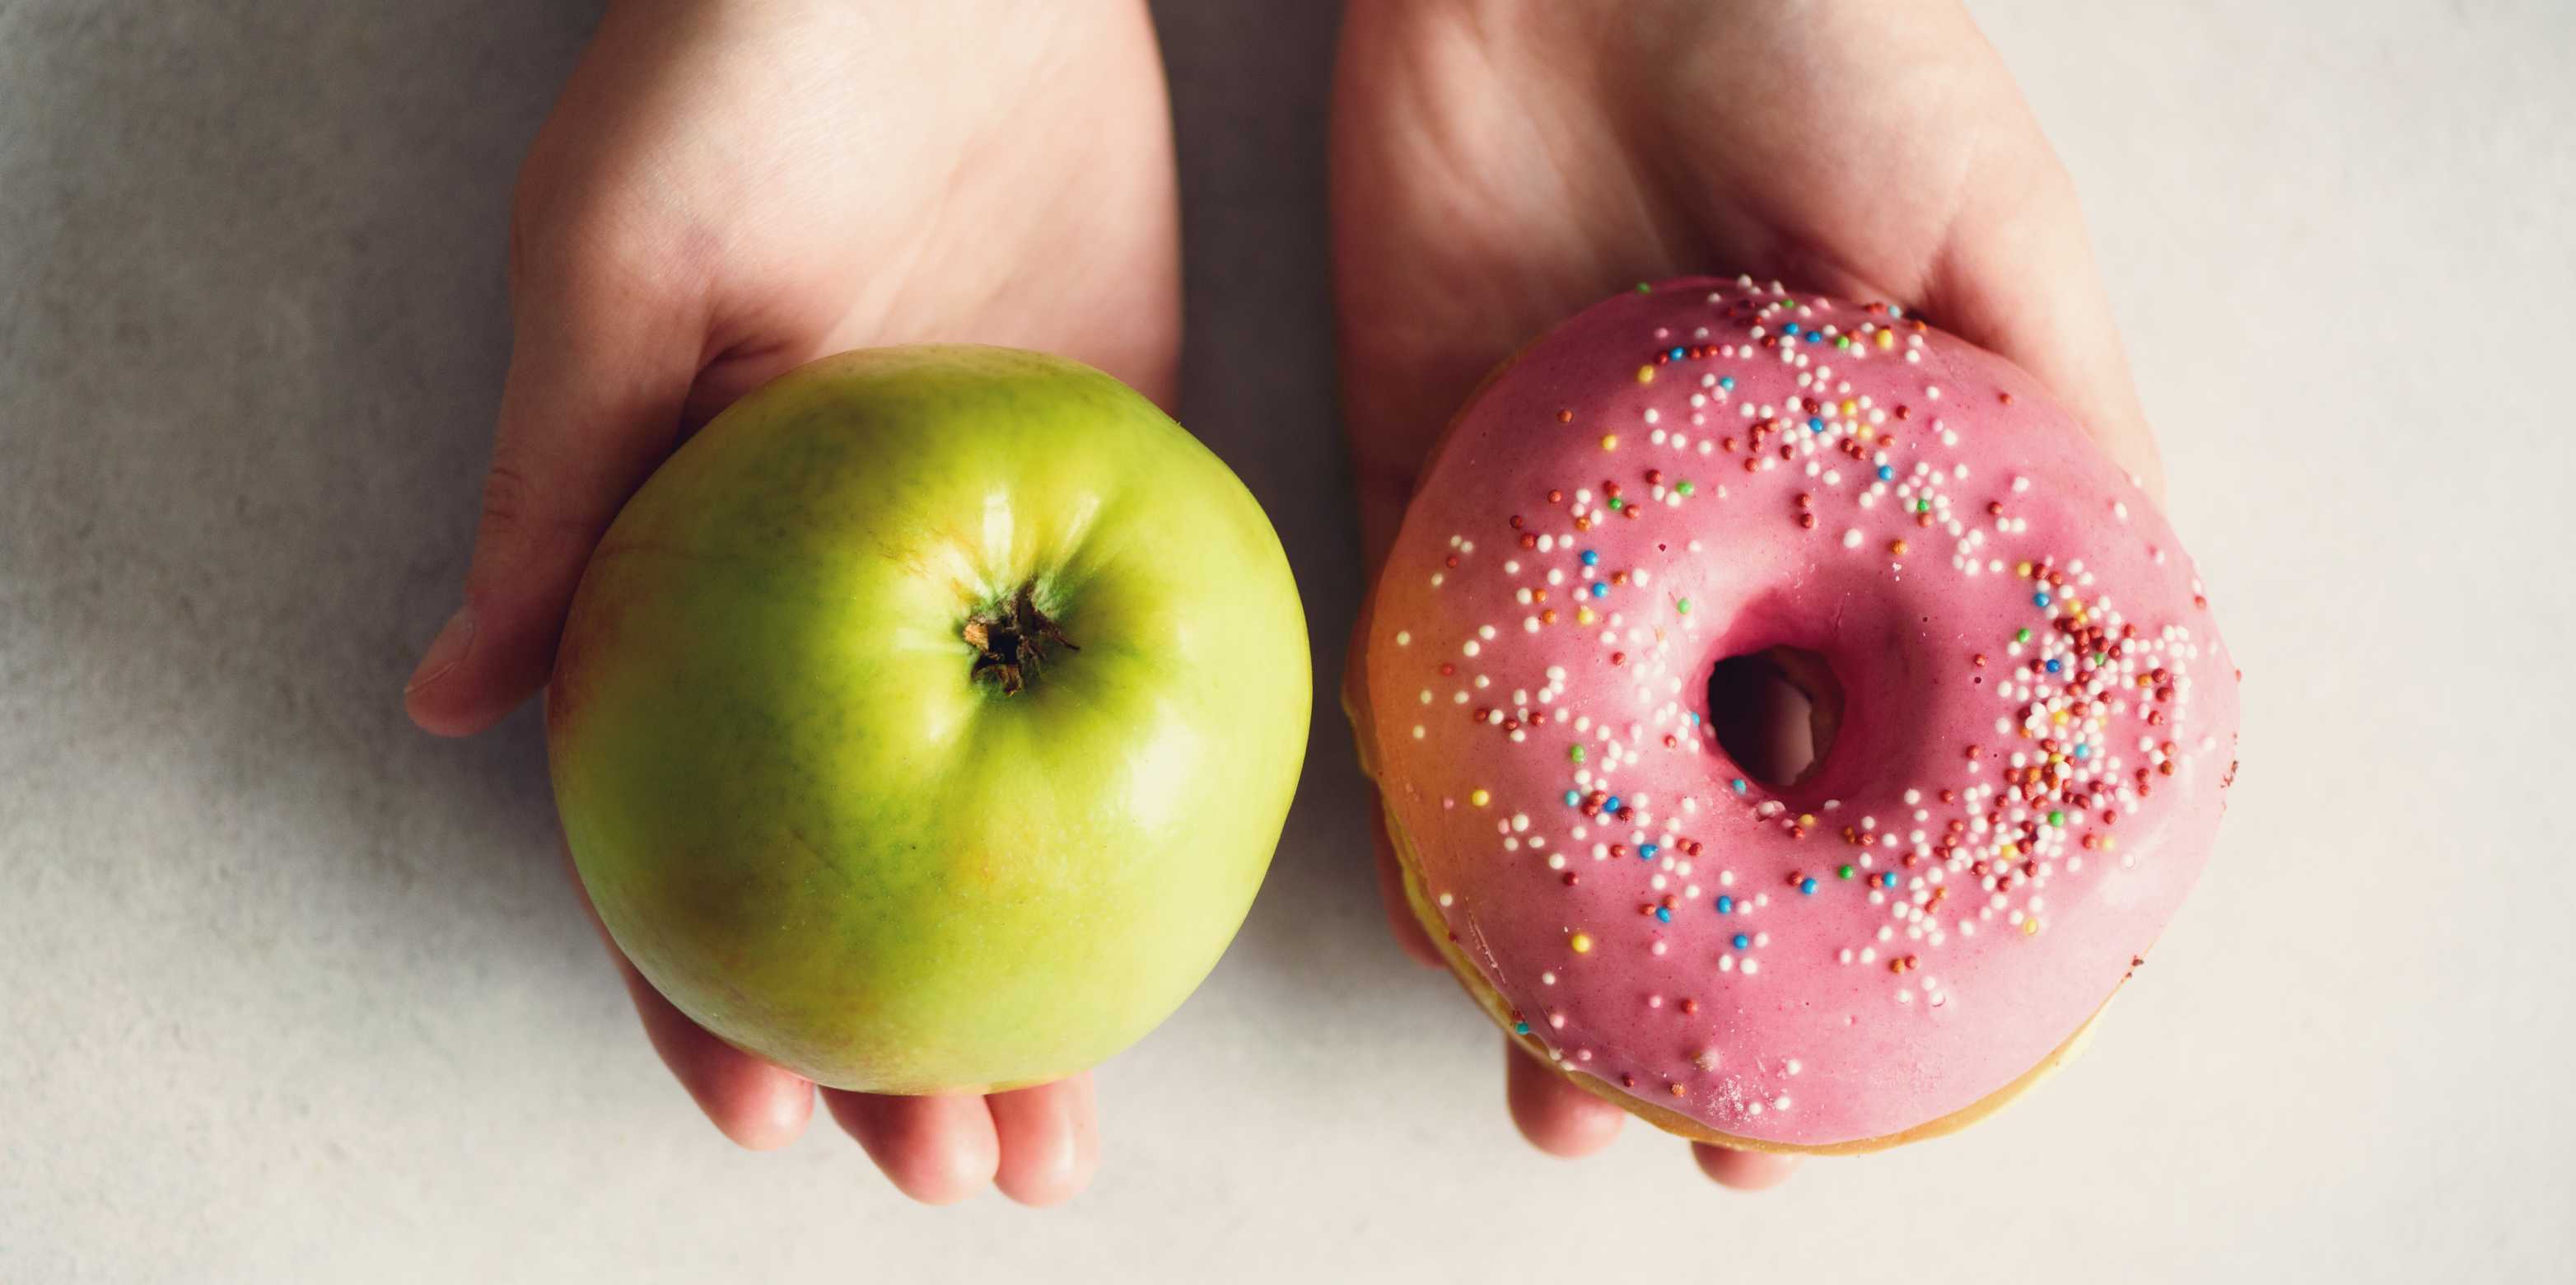 One person presents an apple on one hand and a donut on the other.